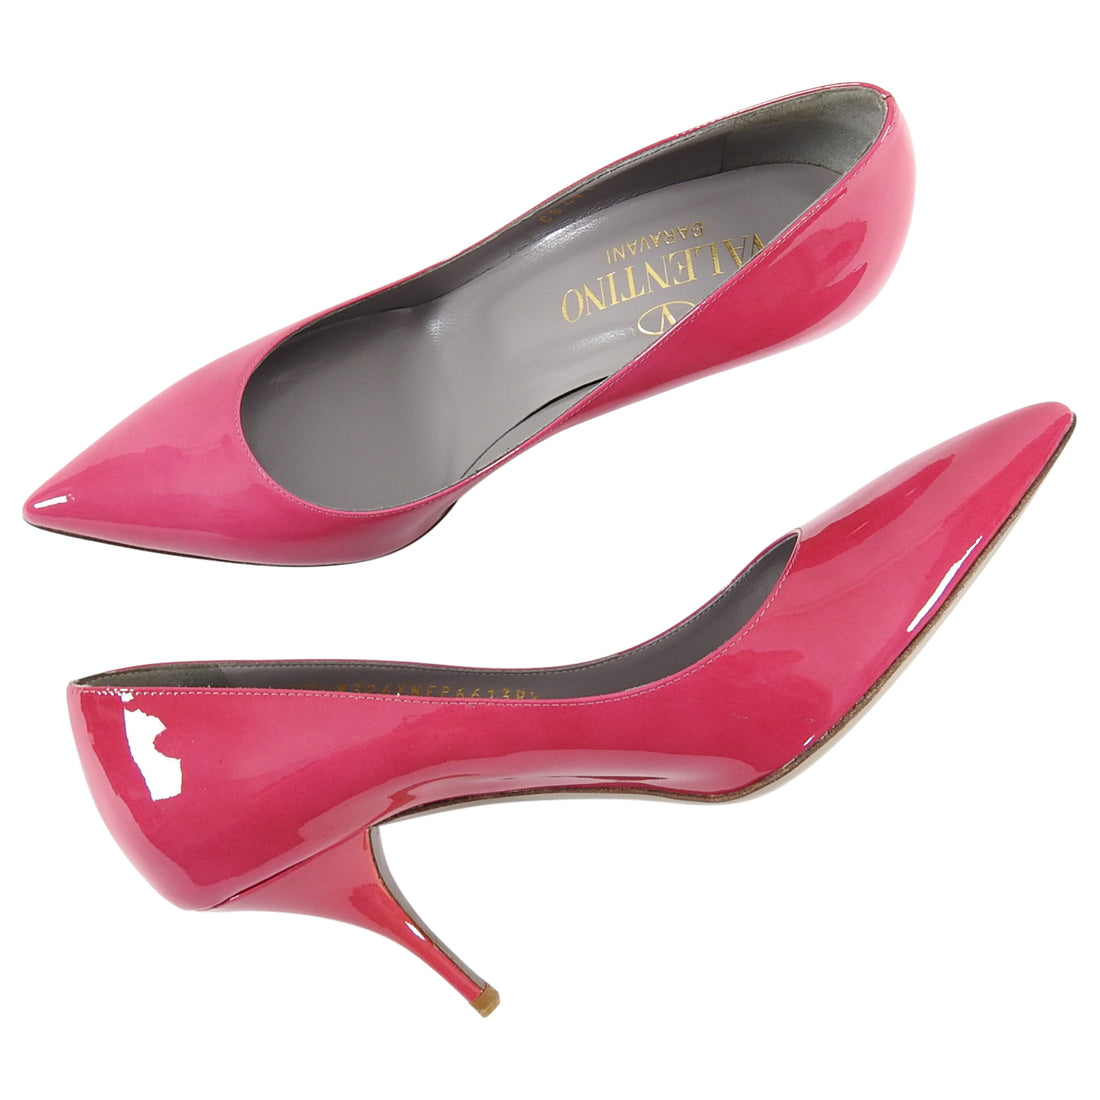 Valentino Hot Pink Ombre Patent Leather Pumps Heels - 38.5 / 8